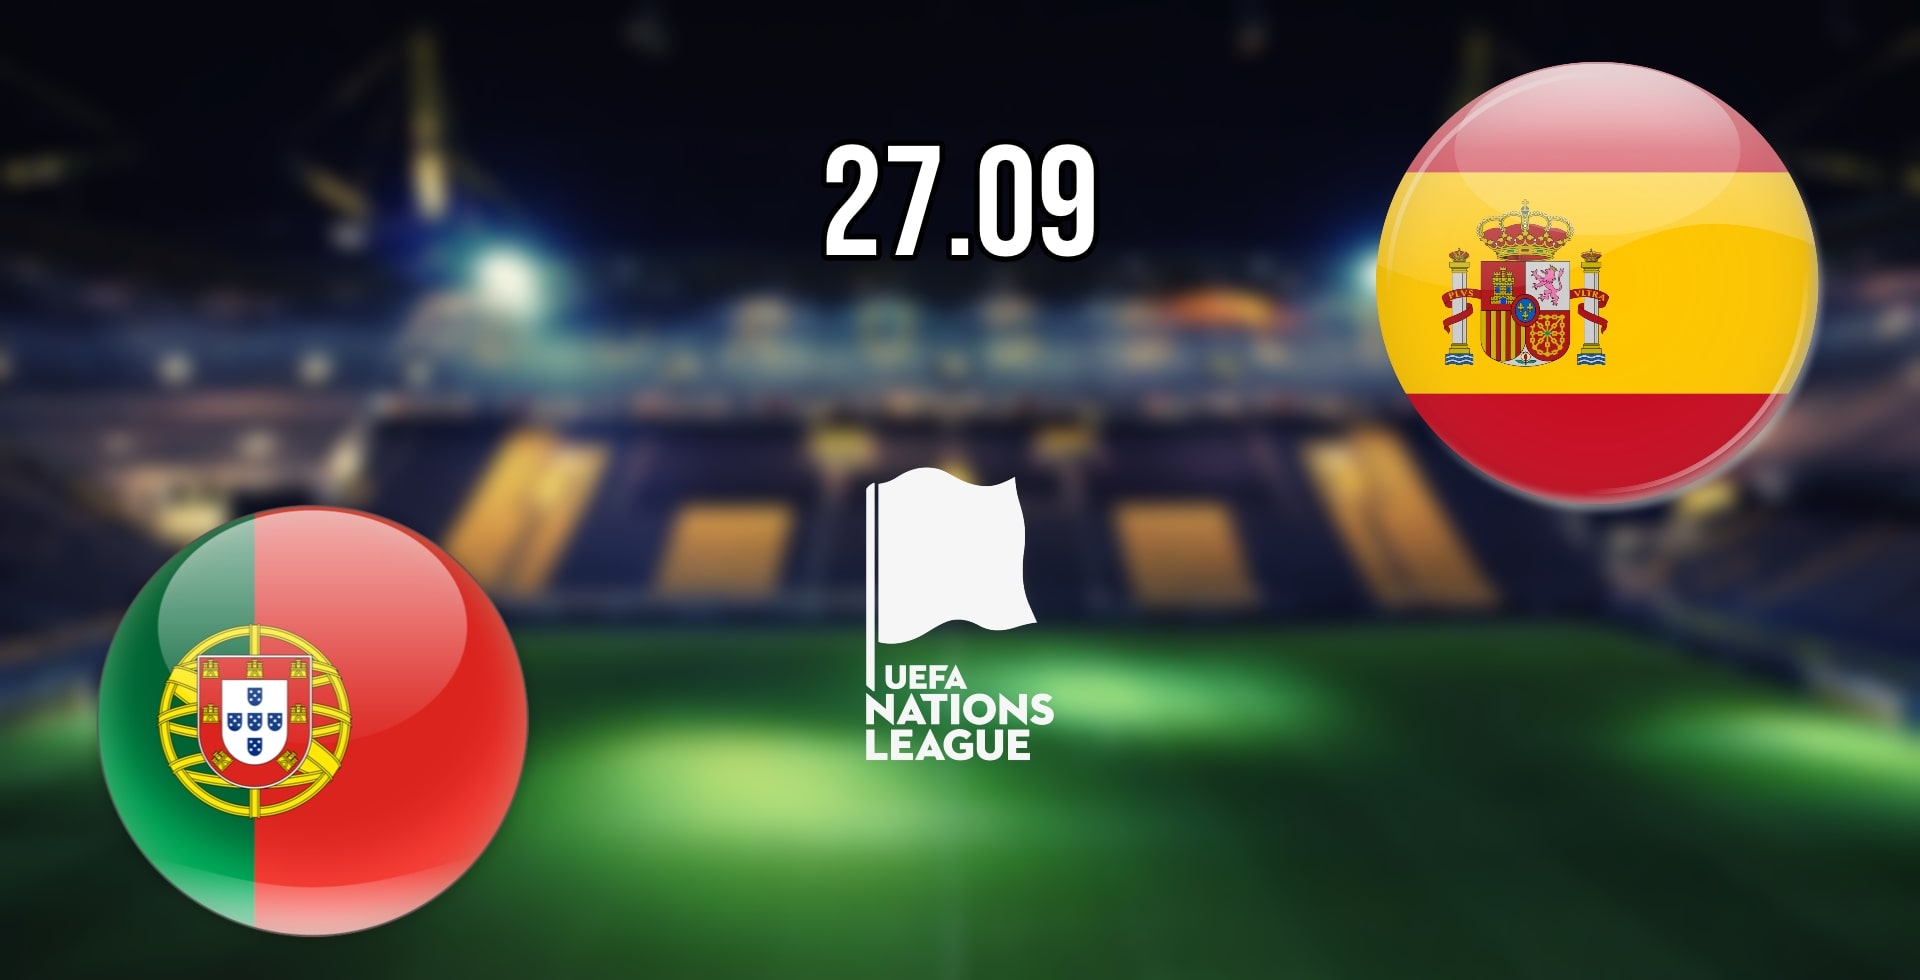 Portugal vs Spain Prediction: Nations League Match on 27.09.2022